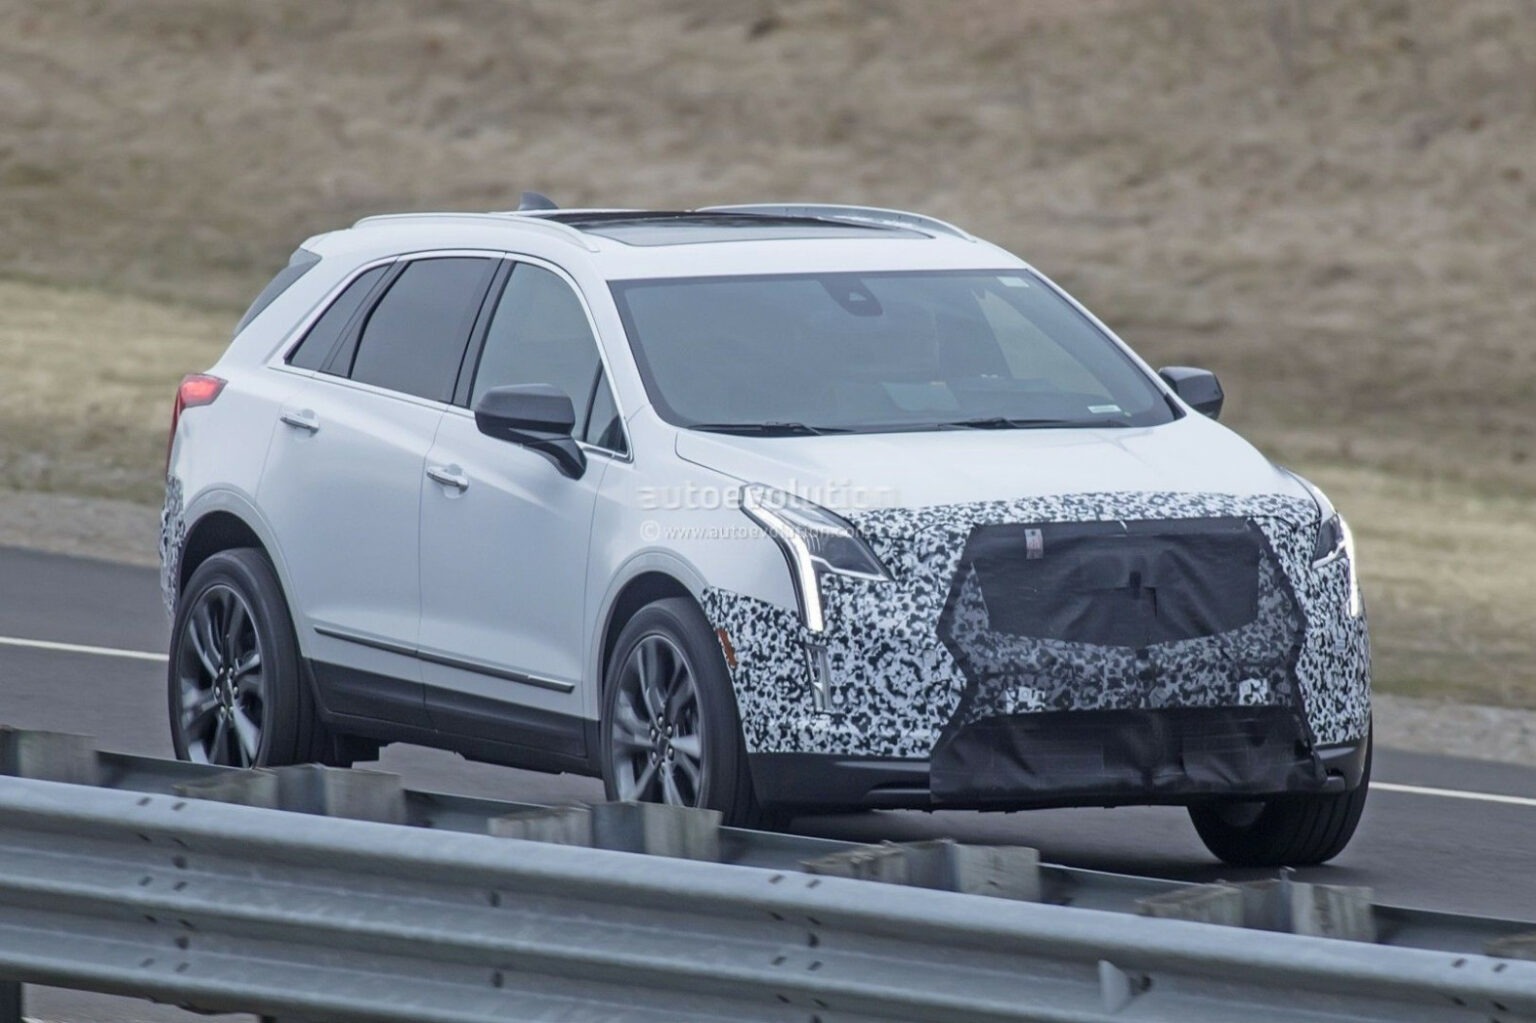 2023 Cadillac XT5: Rumors and What To Expect